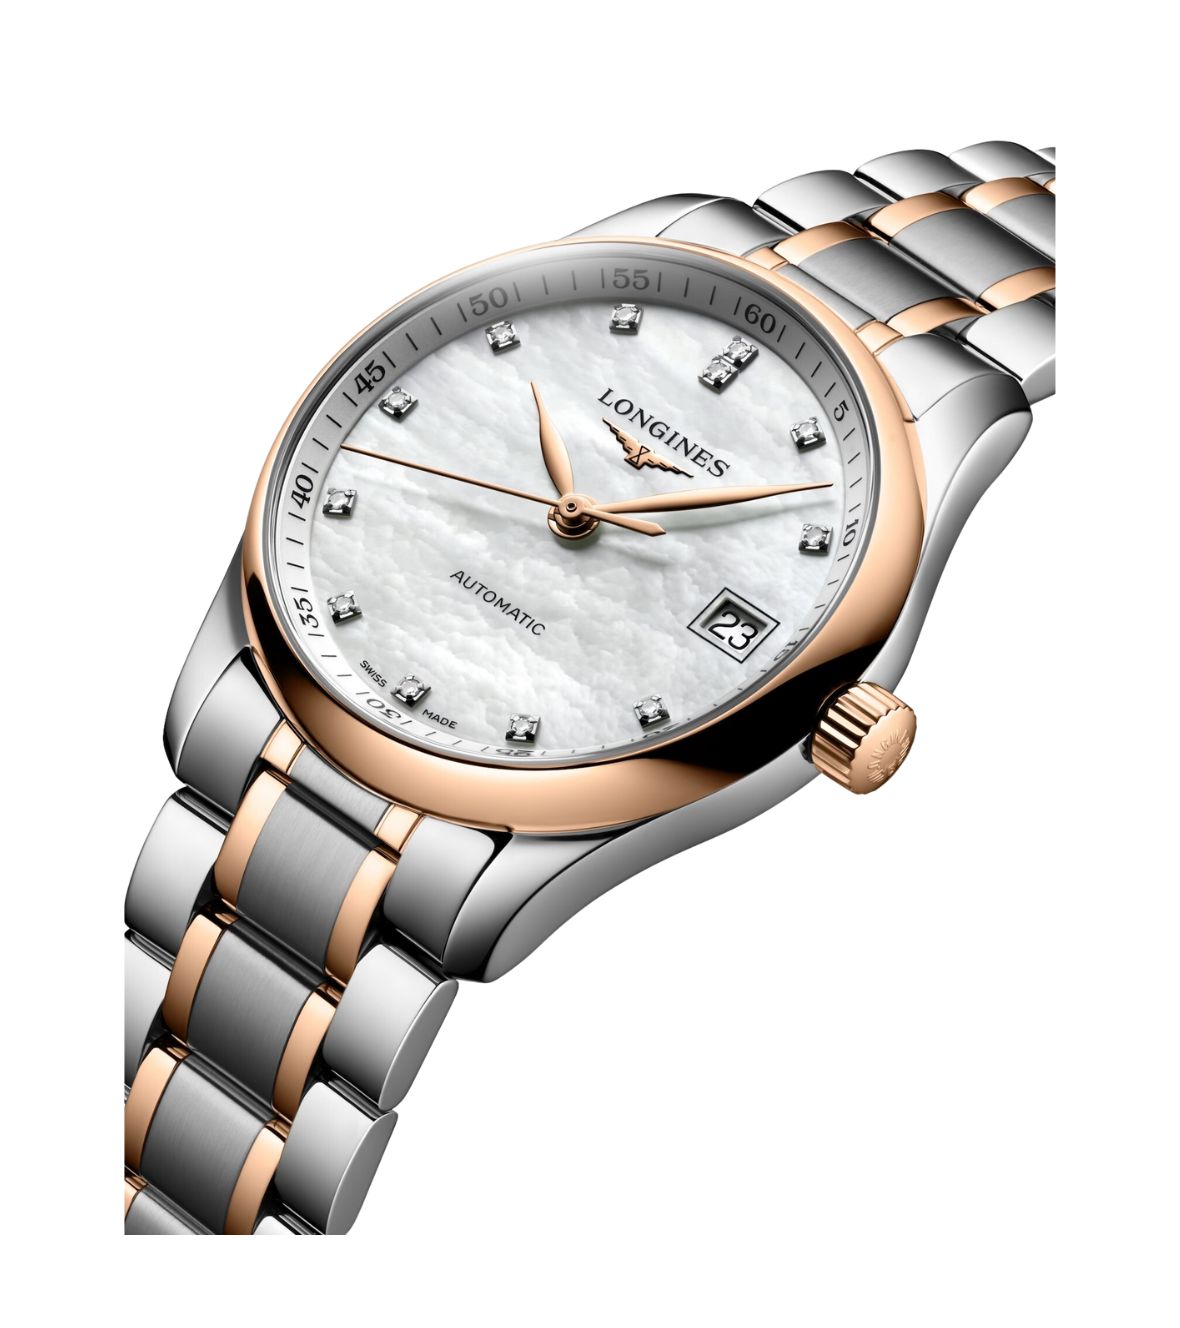 The Longines Master Collection L23575897